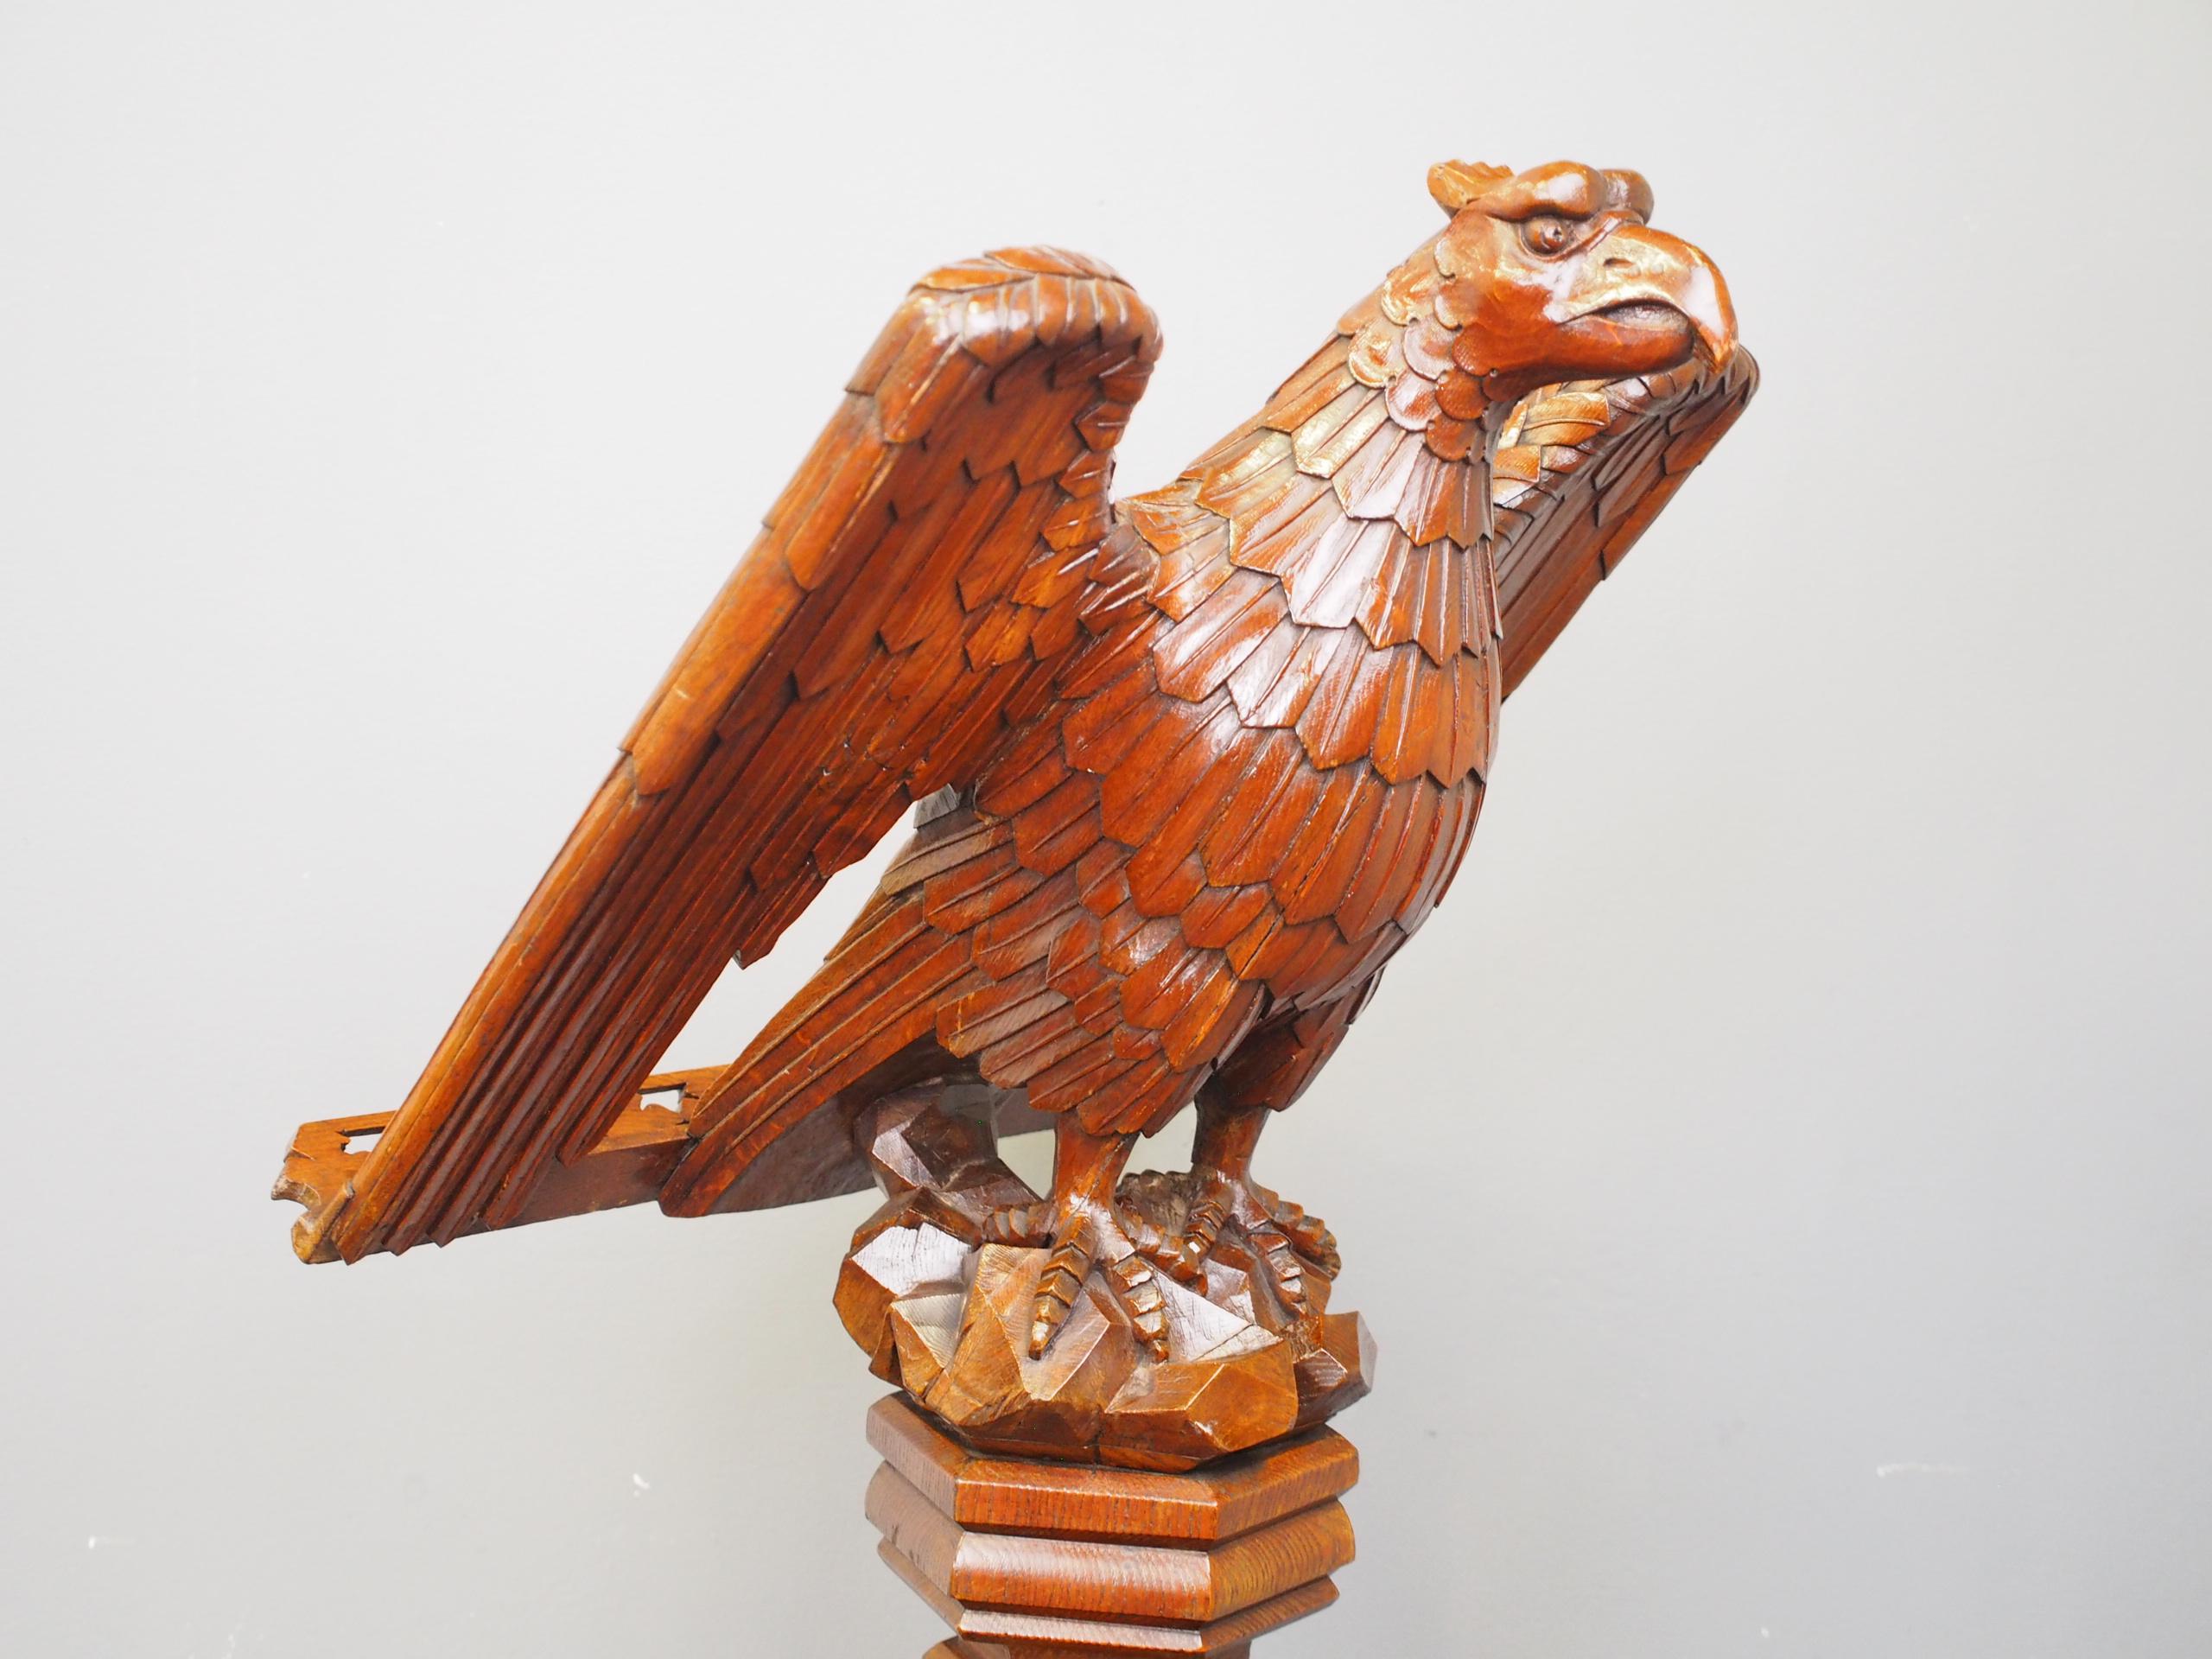 Carved eagle lectern, with stamp of ‘Lamb’, circa 1860. The carved eagle stands on a carved rock design, and the back of the wings has a small open fretwork bracket for holding papers. Standing on a faceted column, with bezels towards the base which